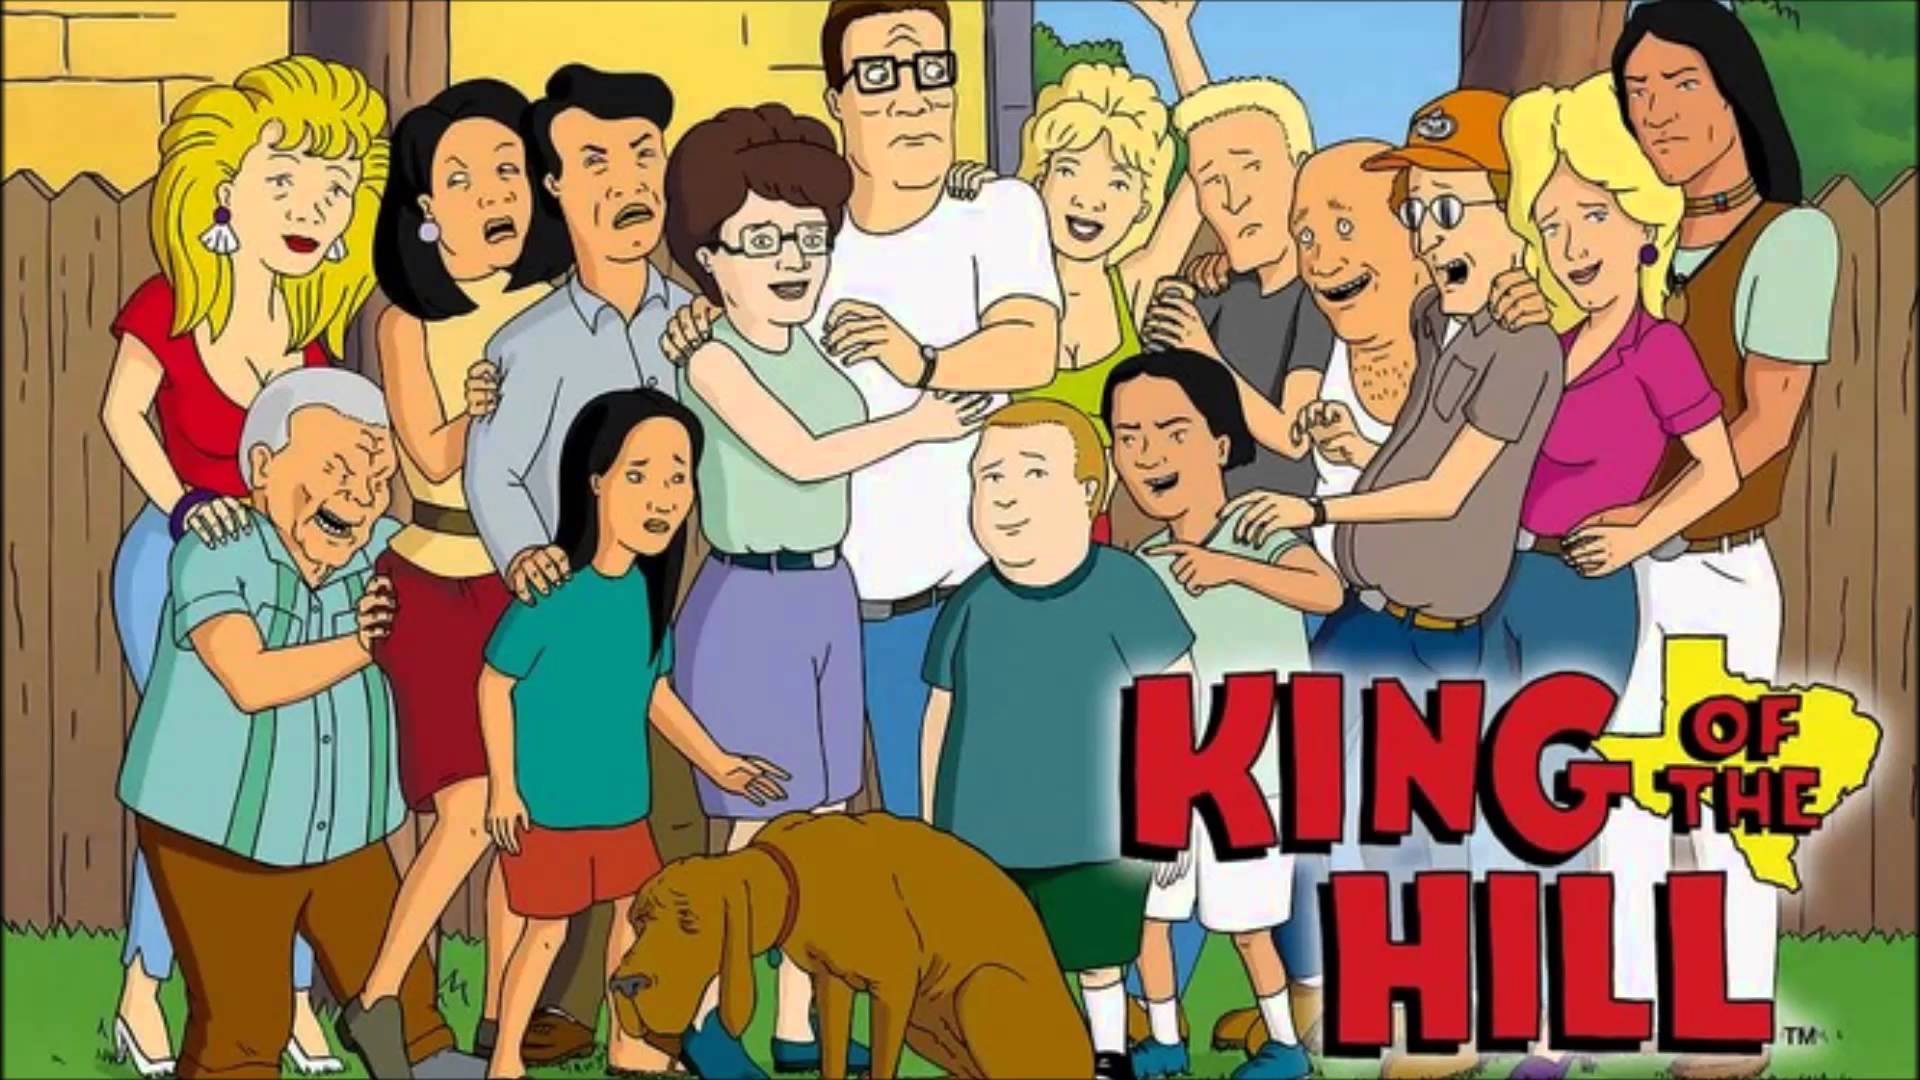 King of the hill wav files